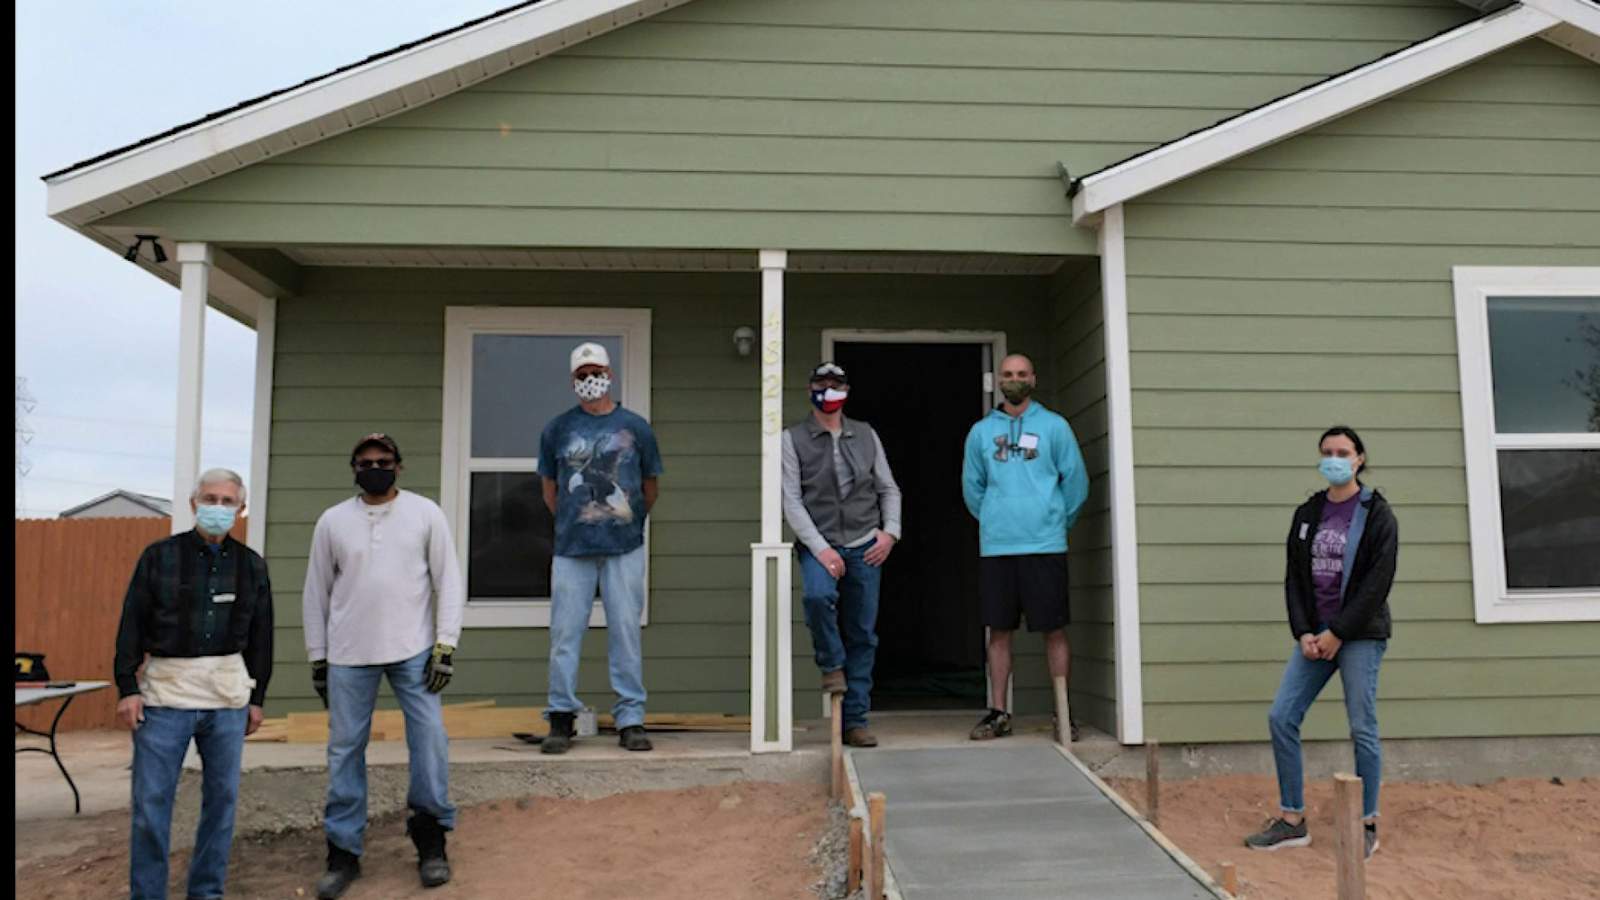 Habitat for Humanity gave more than 50 homes to San Antonio families in 2020 despite pandemic